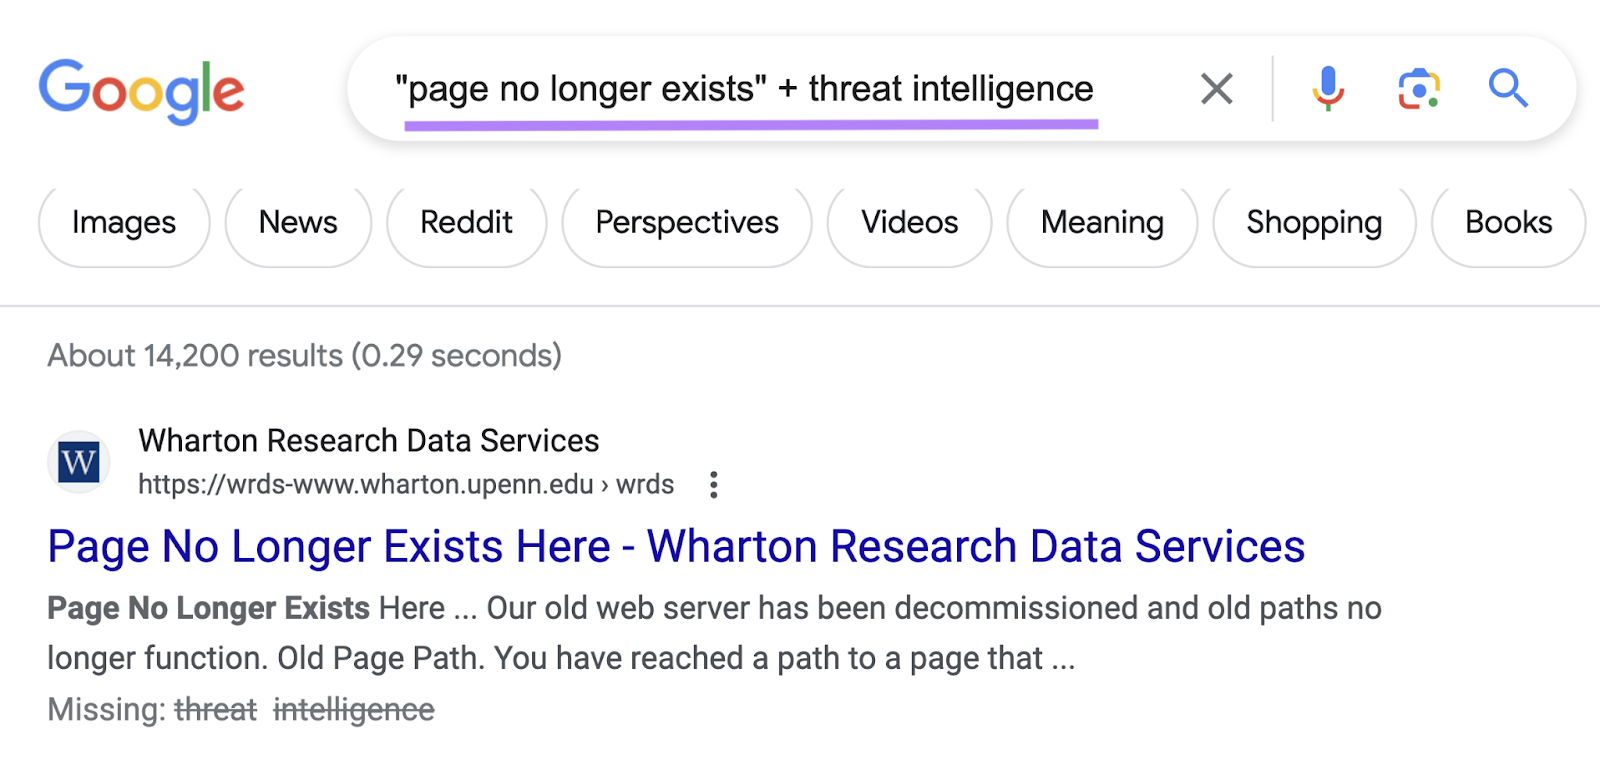 "“page no longer exists” + threat intelligence" search on Google